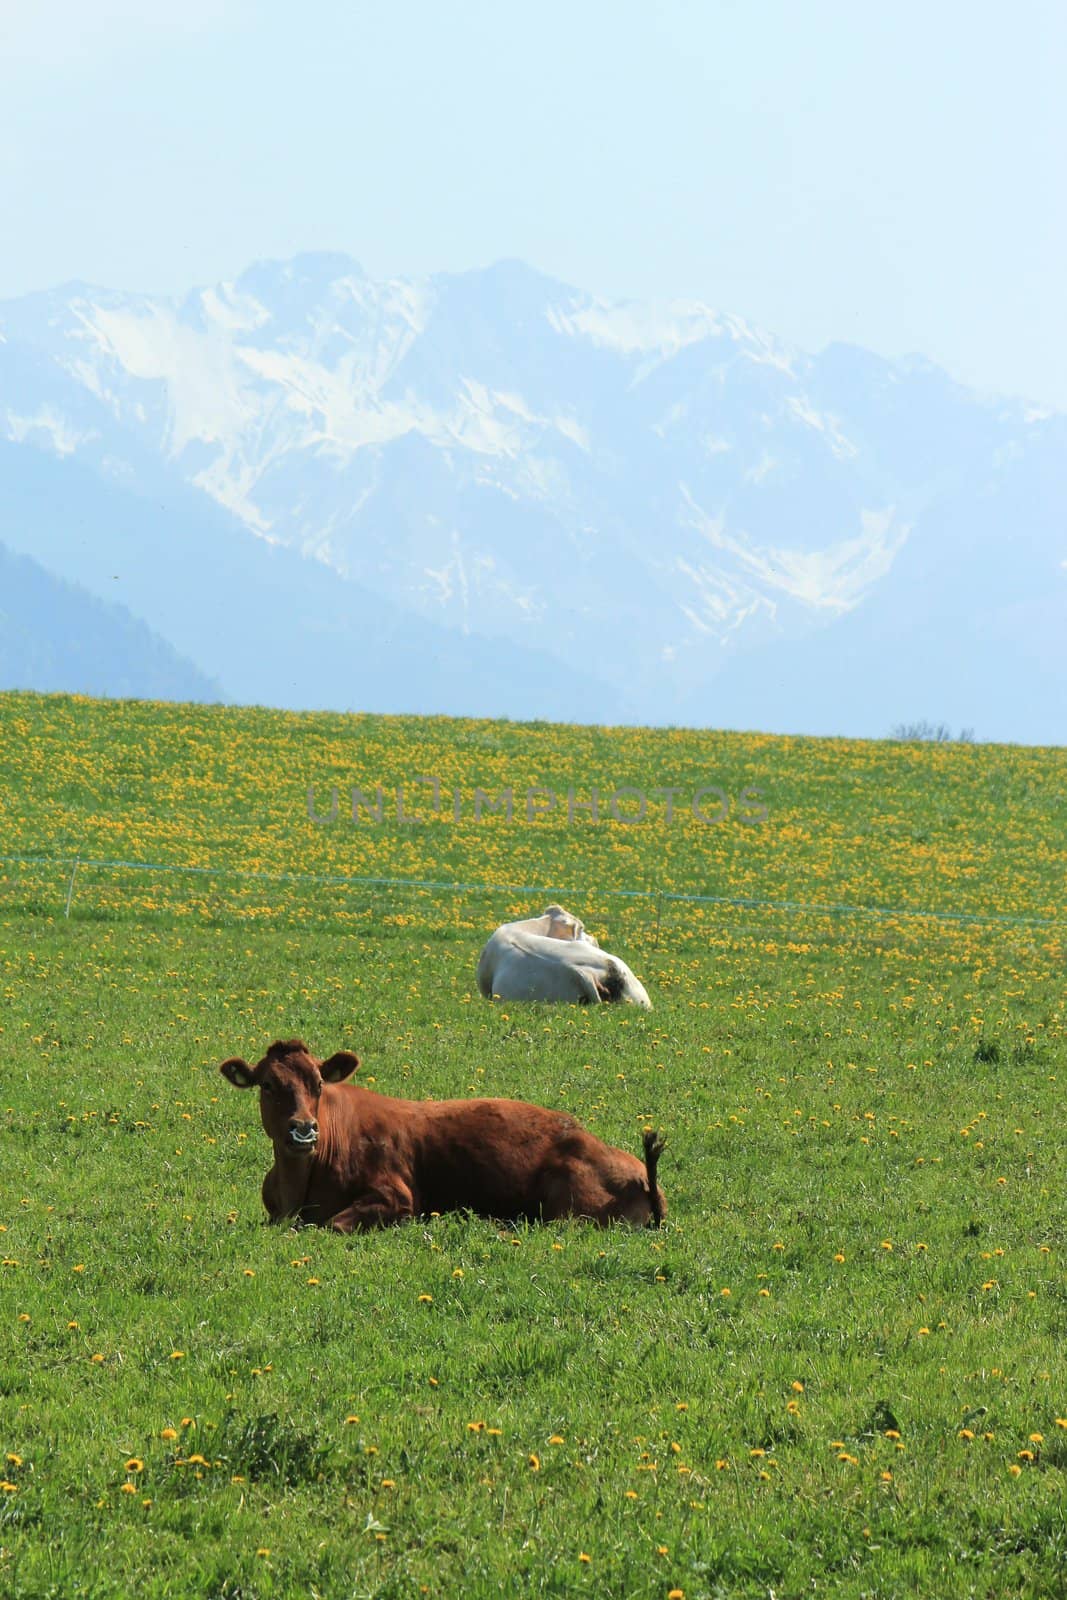 Cows and Alps mountains, Switzerland by Elenaphotos21